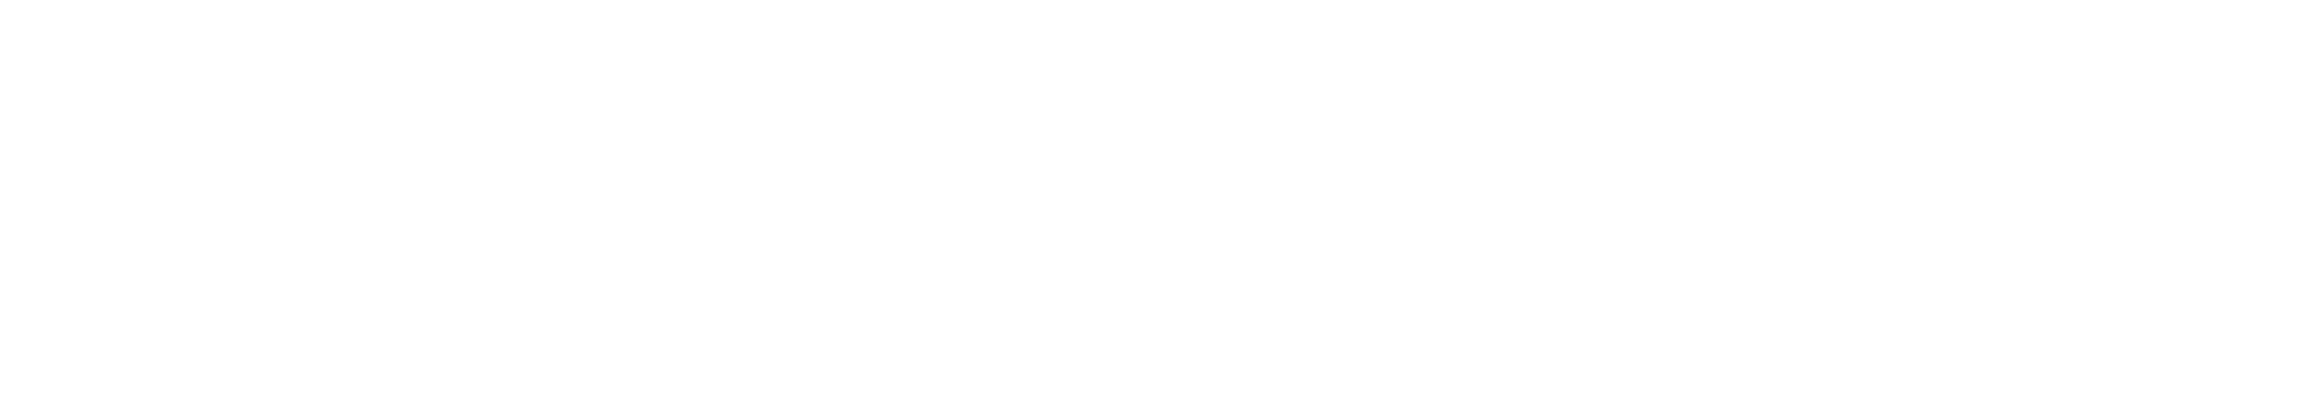 Harbor Group Management logo for Chandlers Bay Apartments